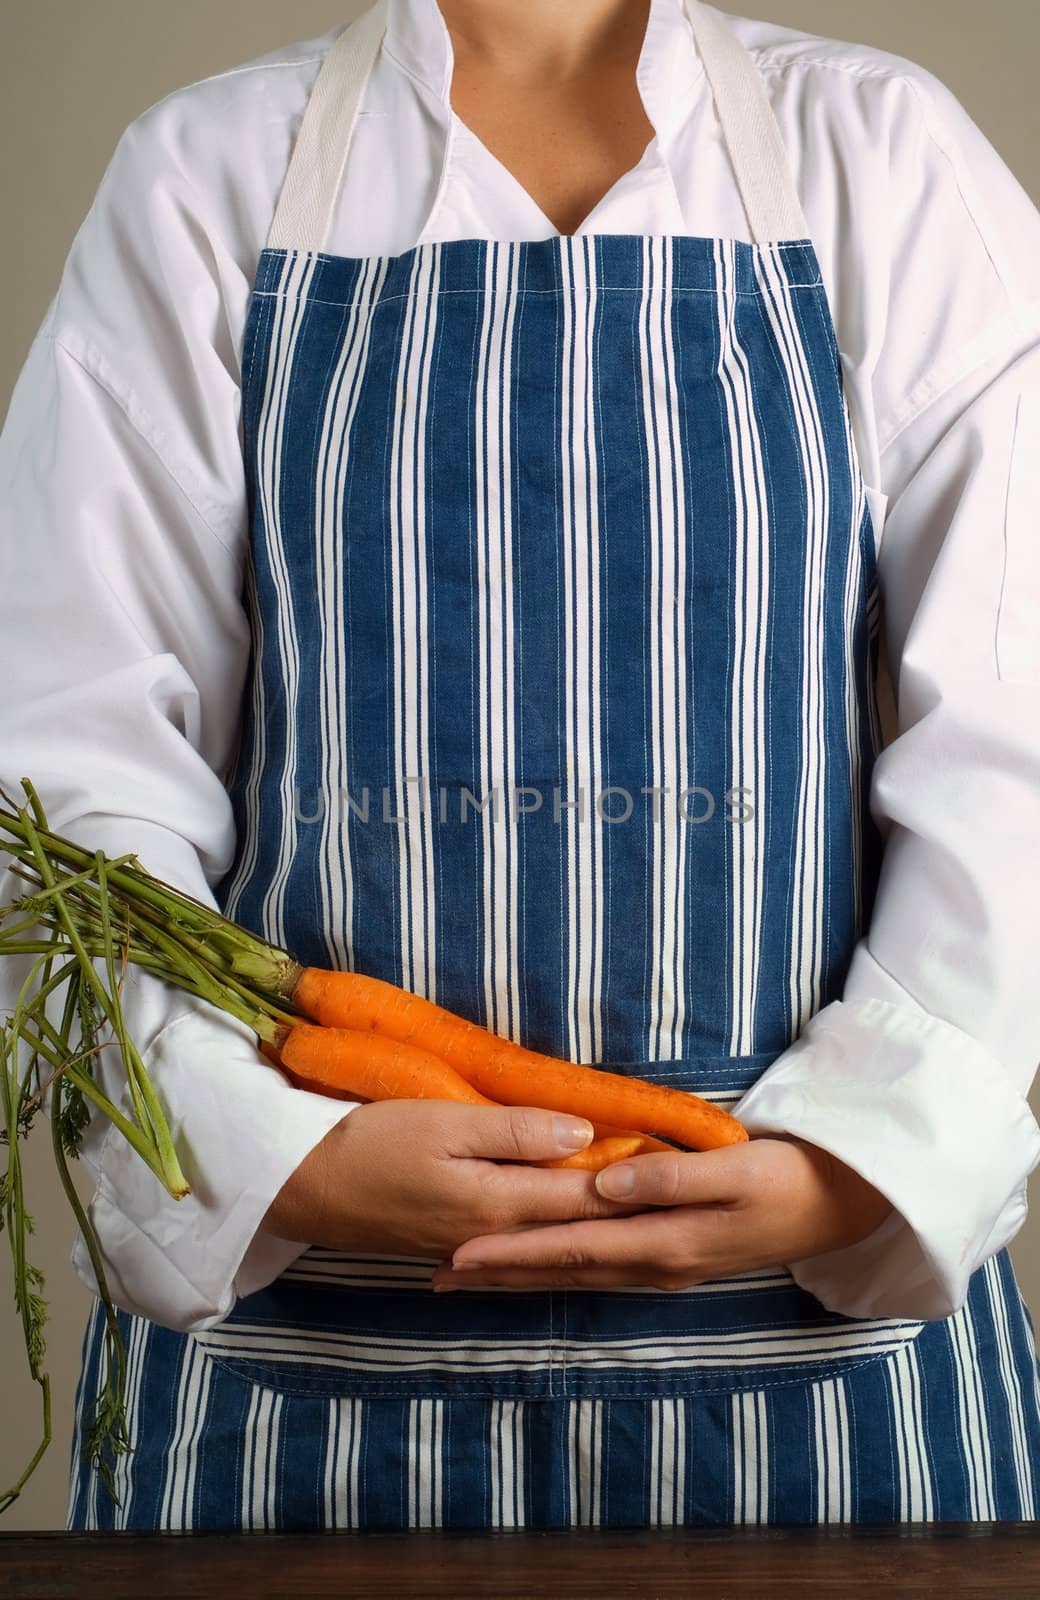 Woman chef or cook holding carrots in her hands